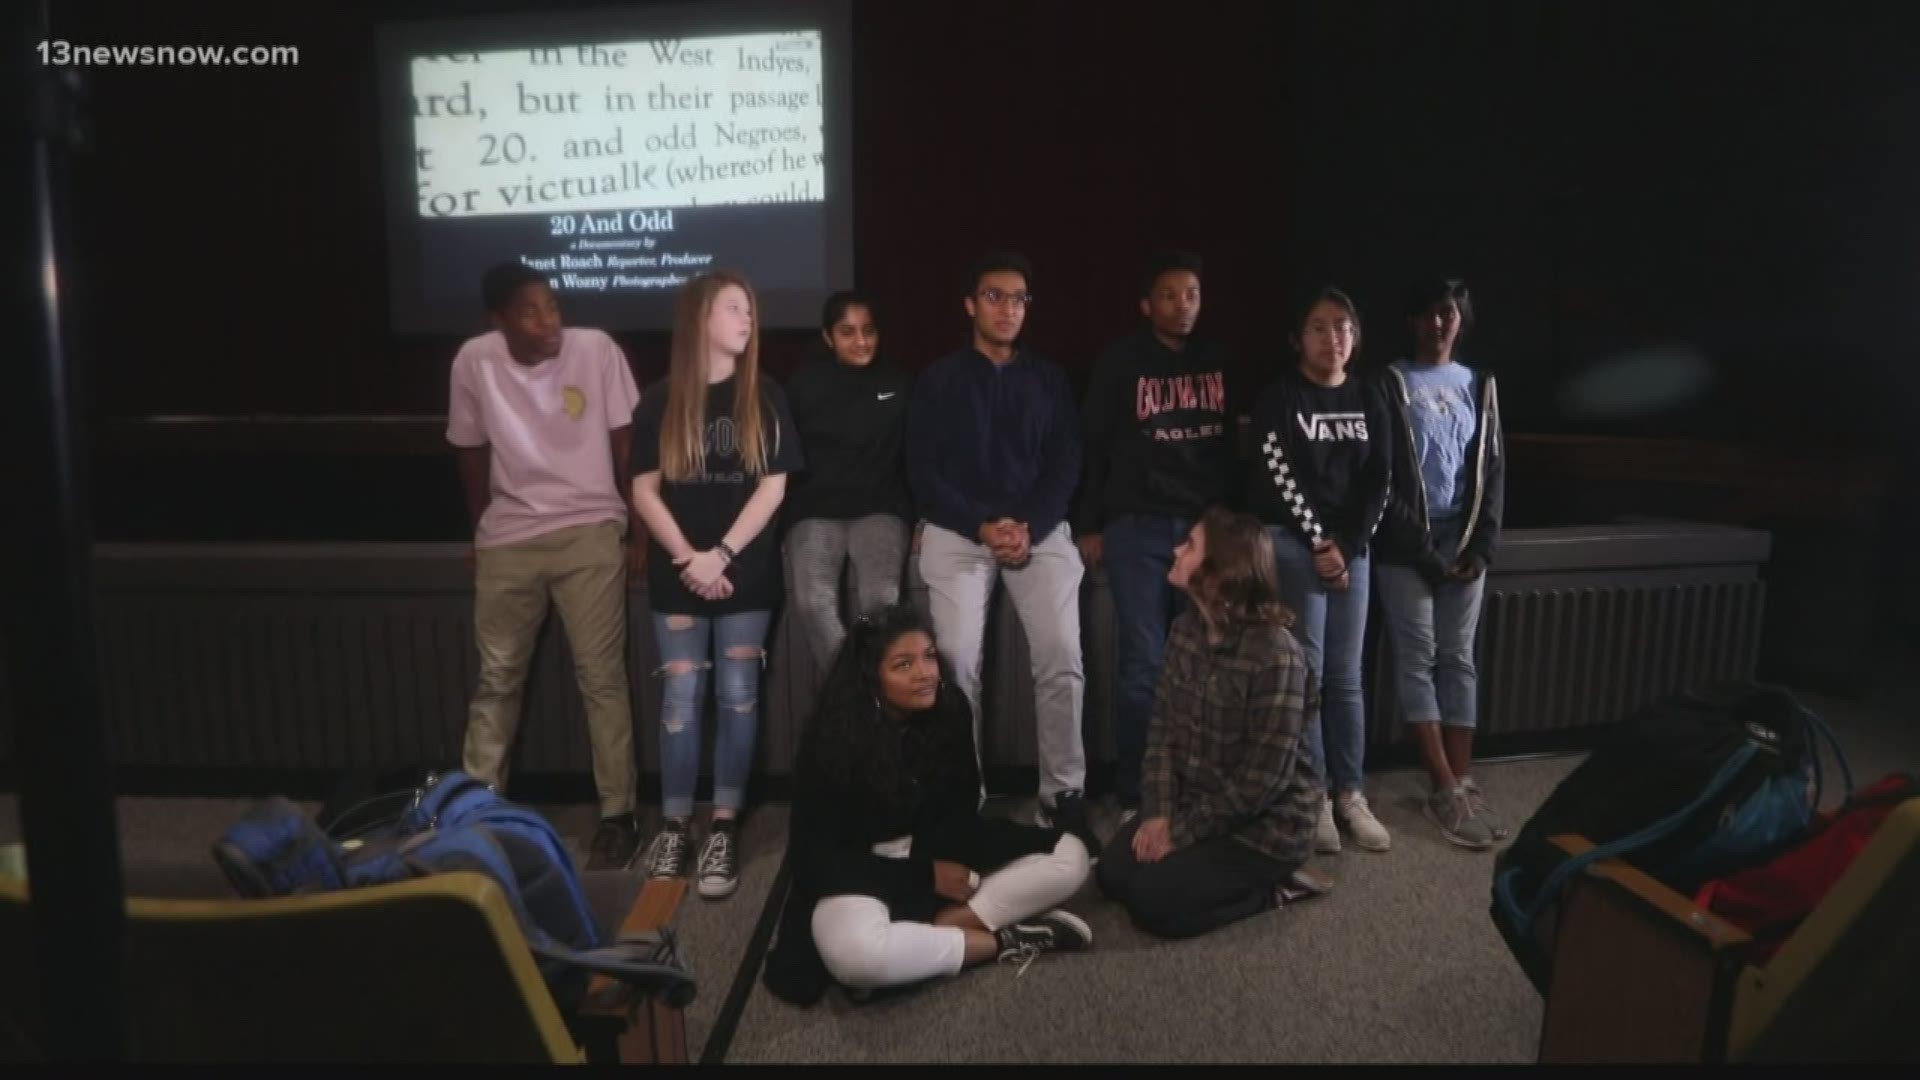 Local high school students watched the 13News Now documentary 20 and Odd about the first Africans in English North America.